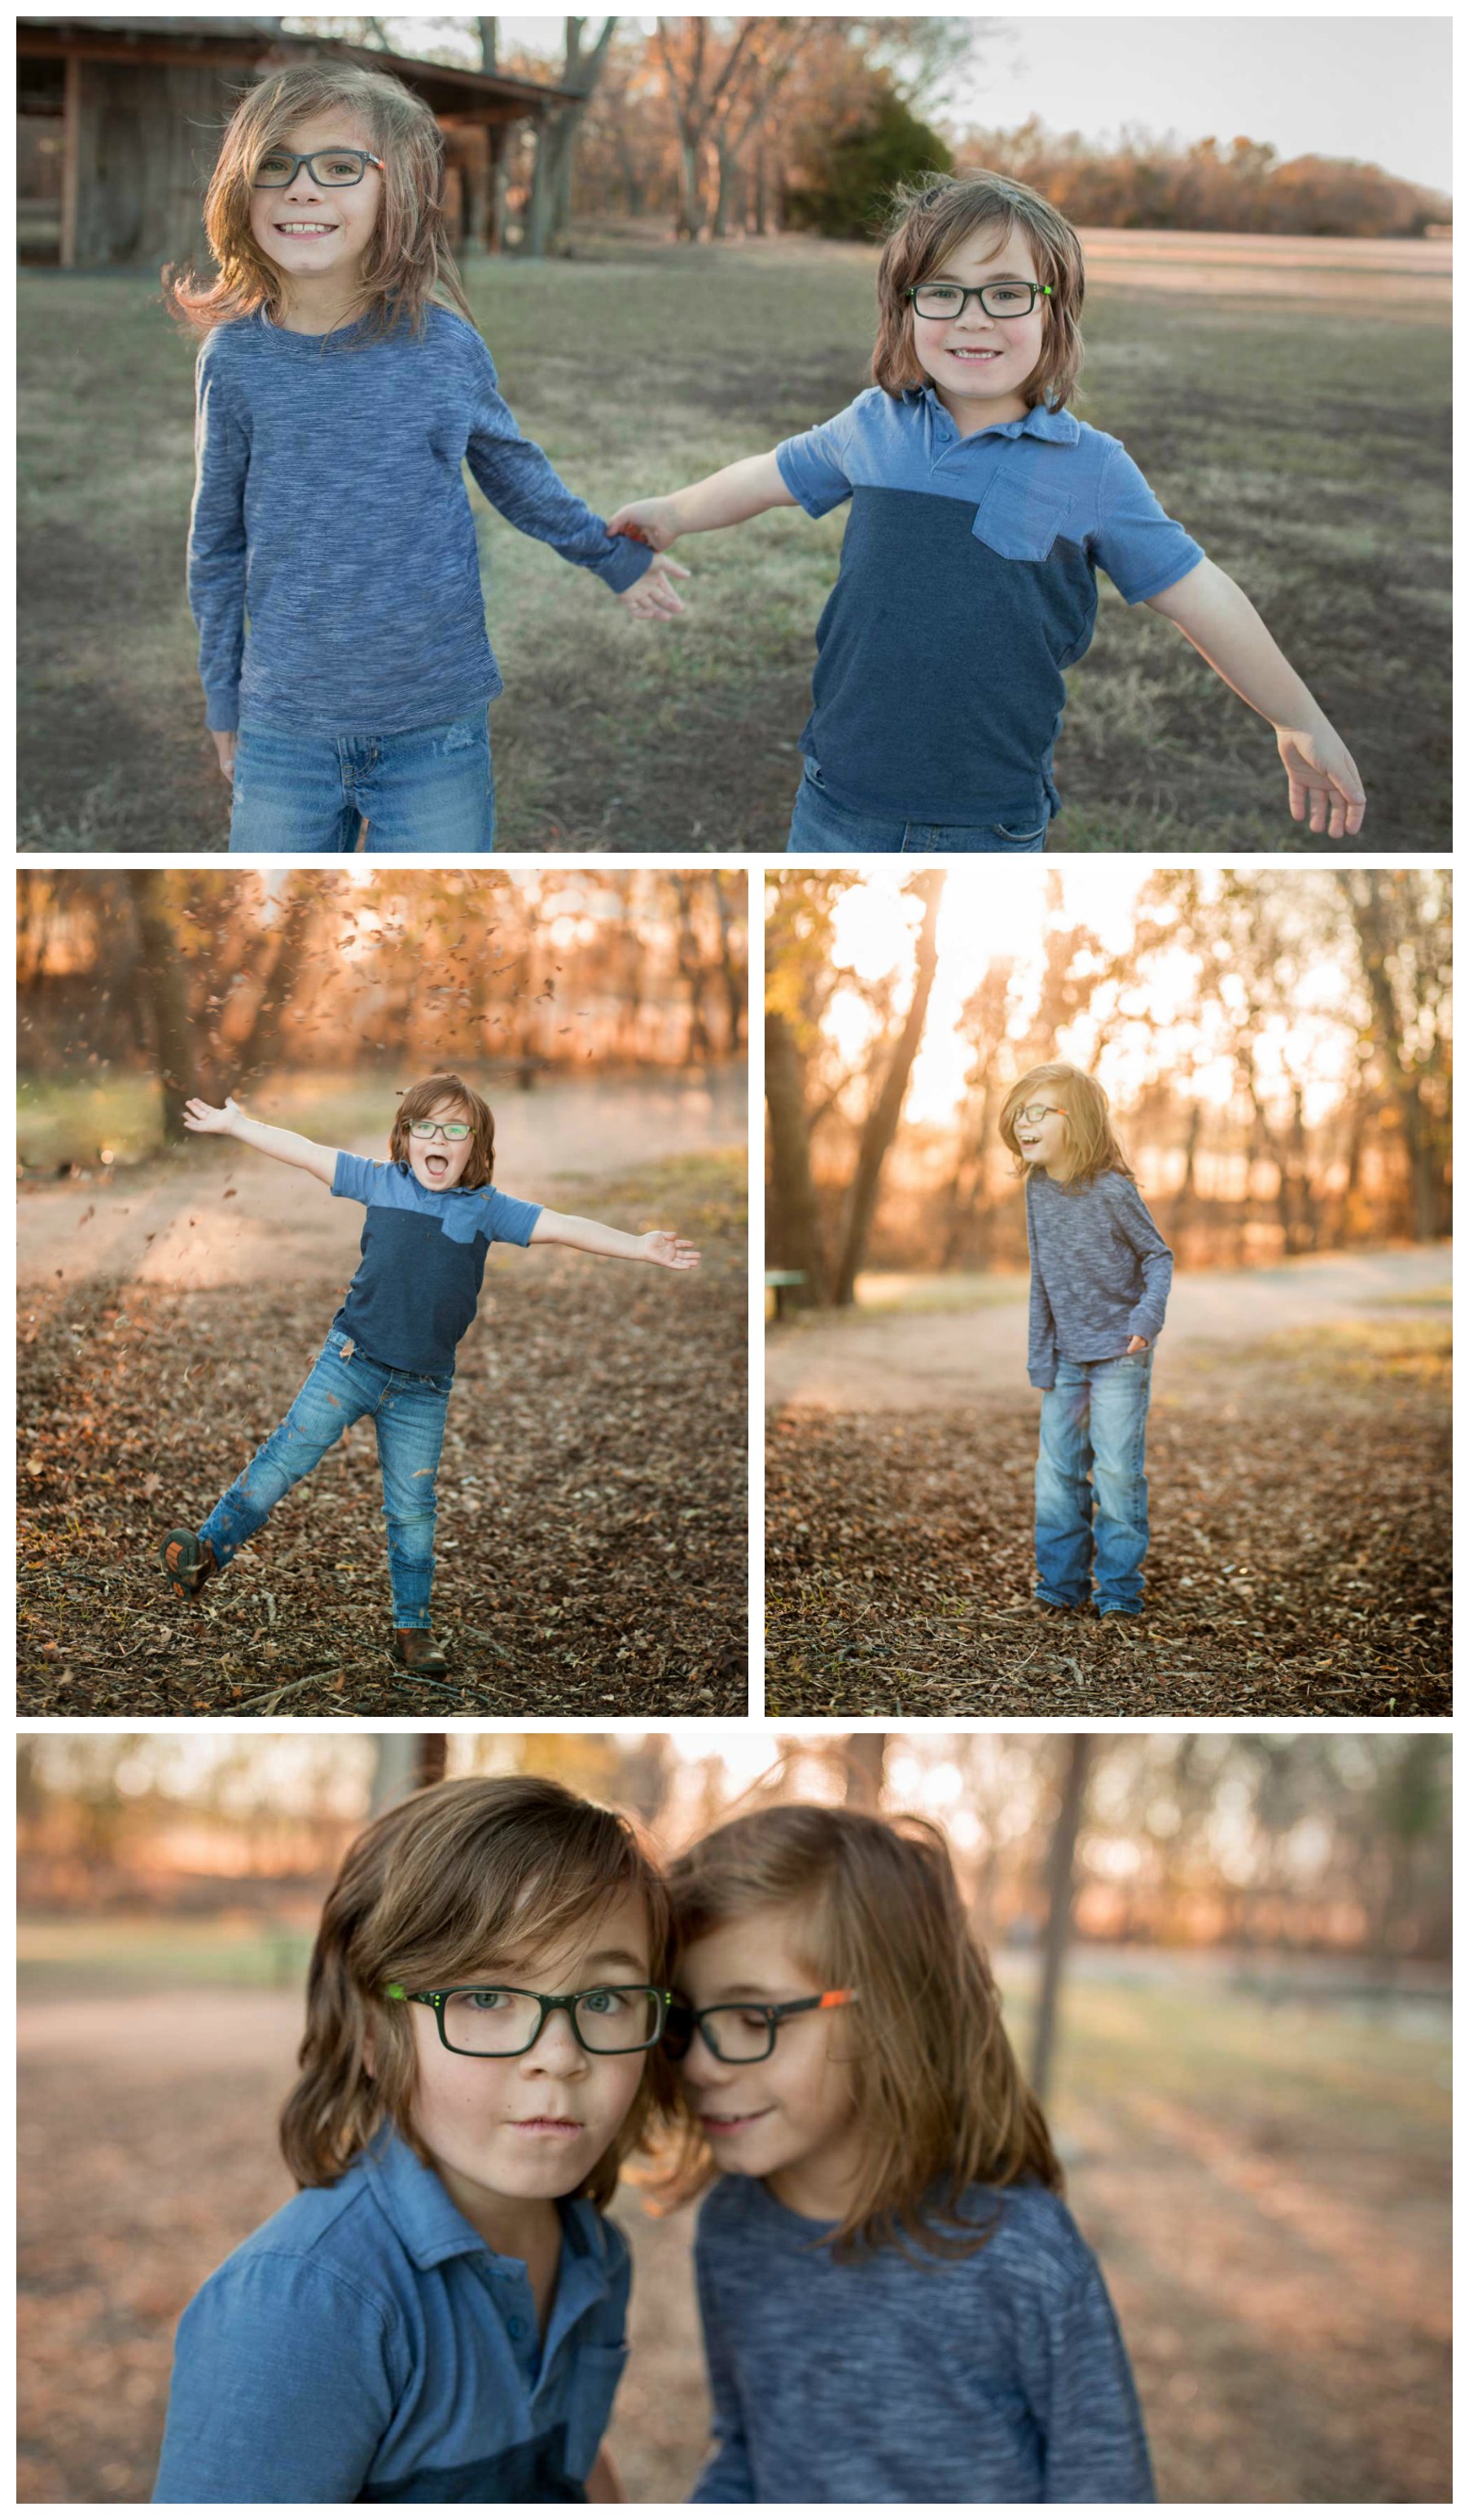 Photographer in Dallas Tx | Sunset family session in the woods | #FamilyPortraitsDallas  #FamilyPhotographerDallas #FamilyPhotography  #OutdoorFamilyPhotographyDallas #PhotographerinDallas